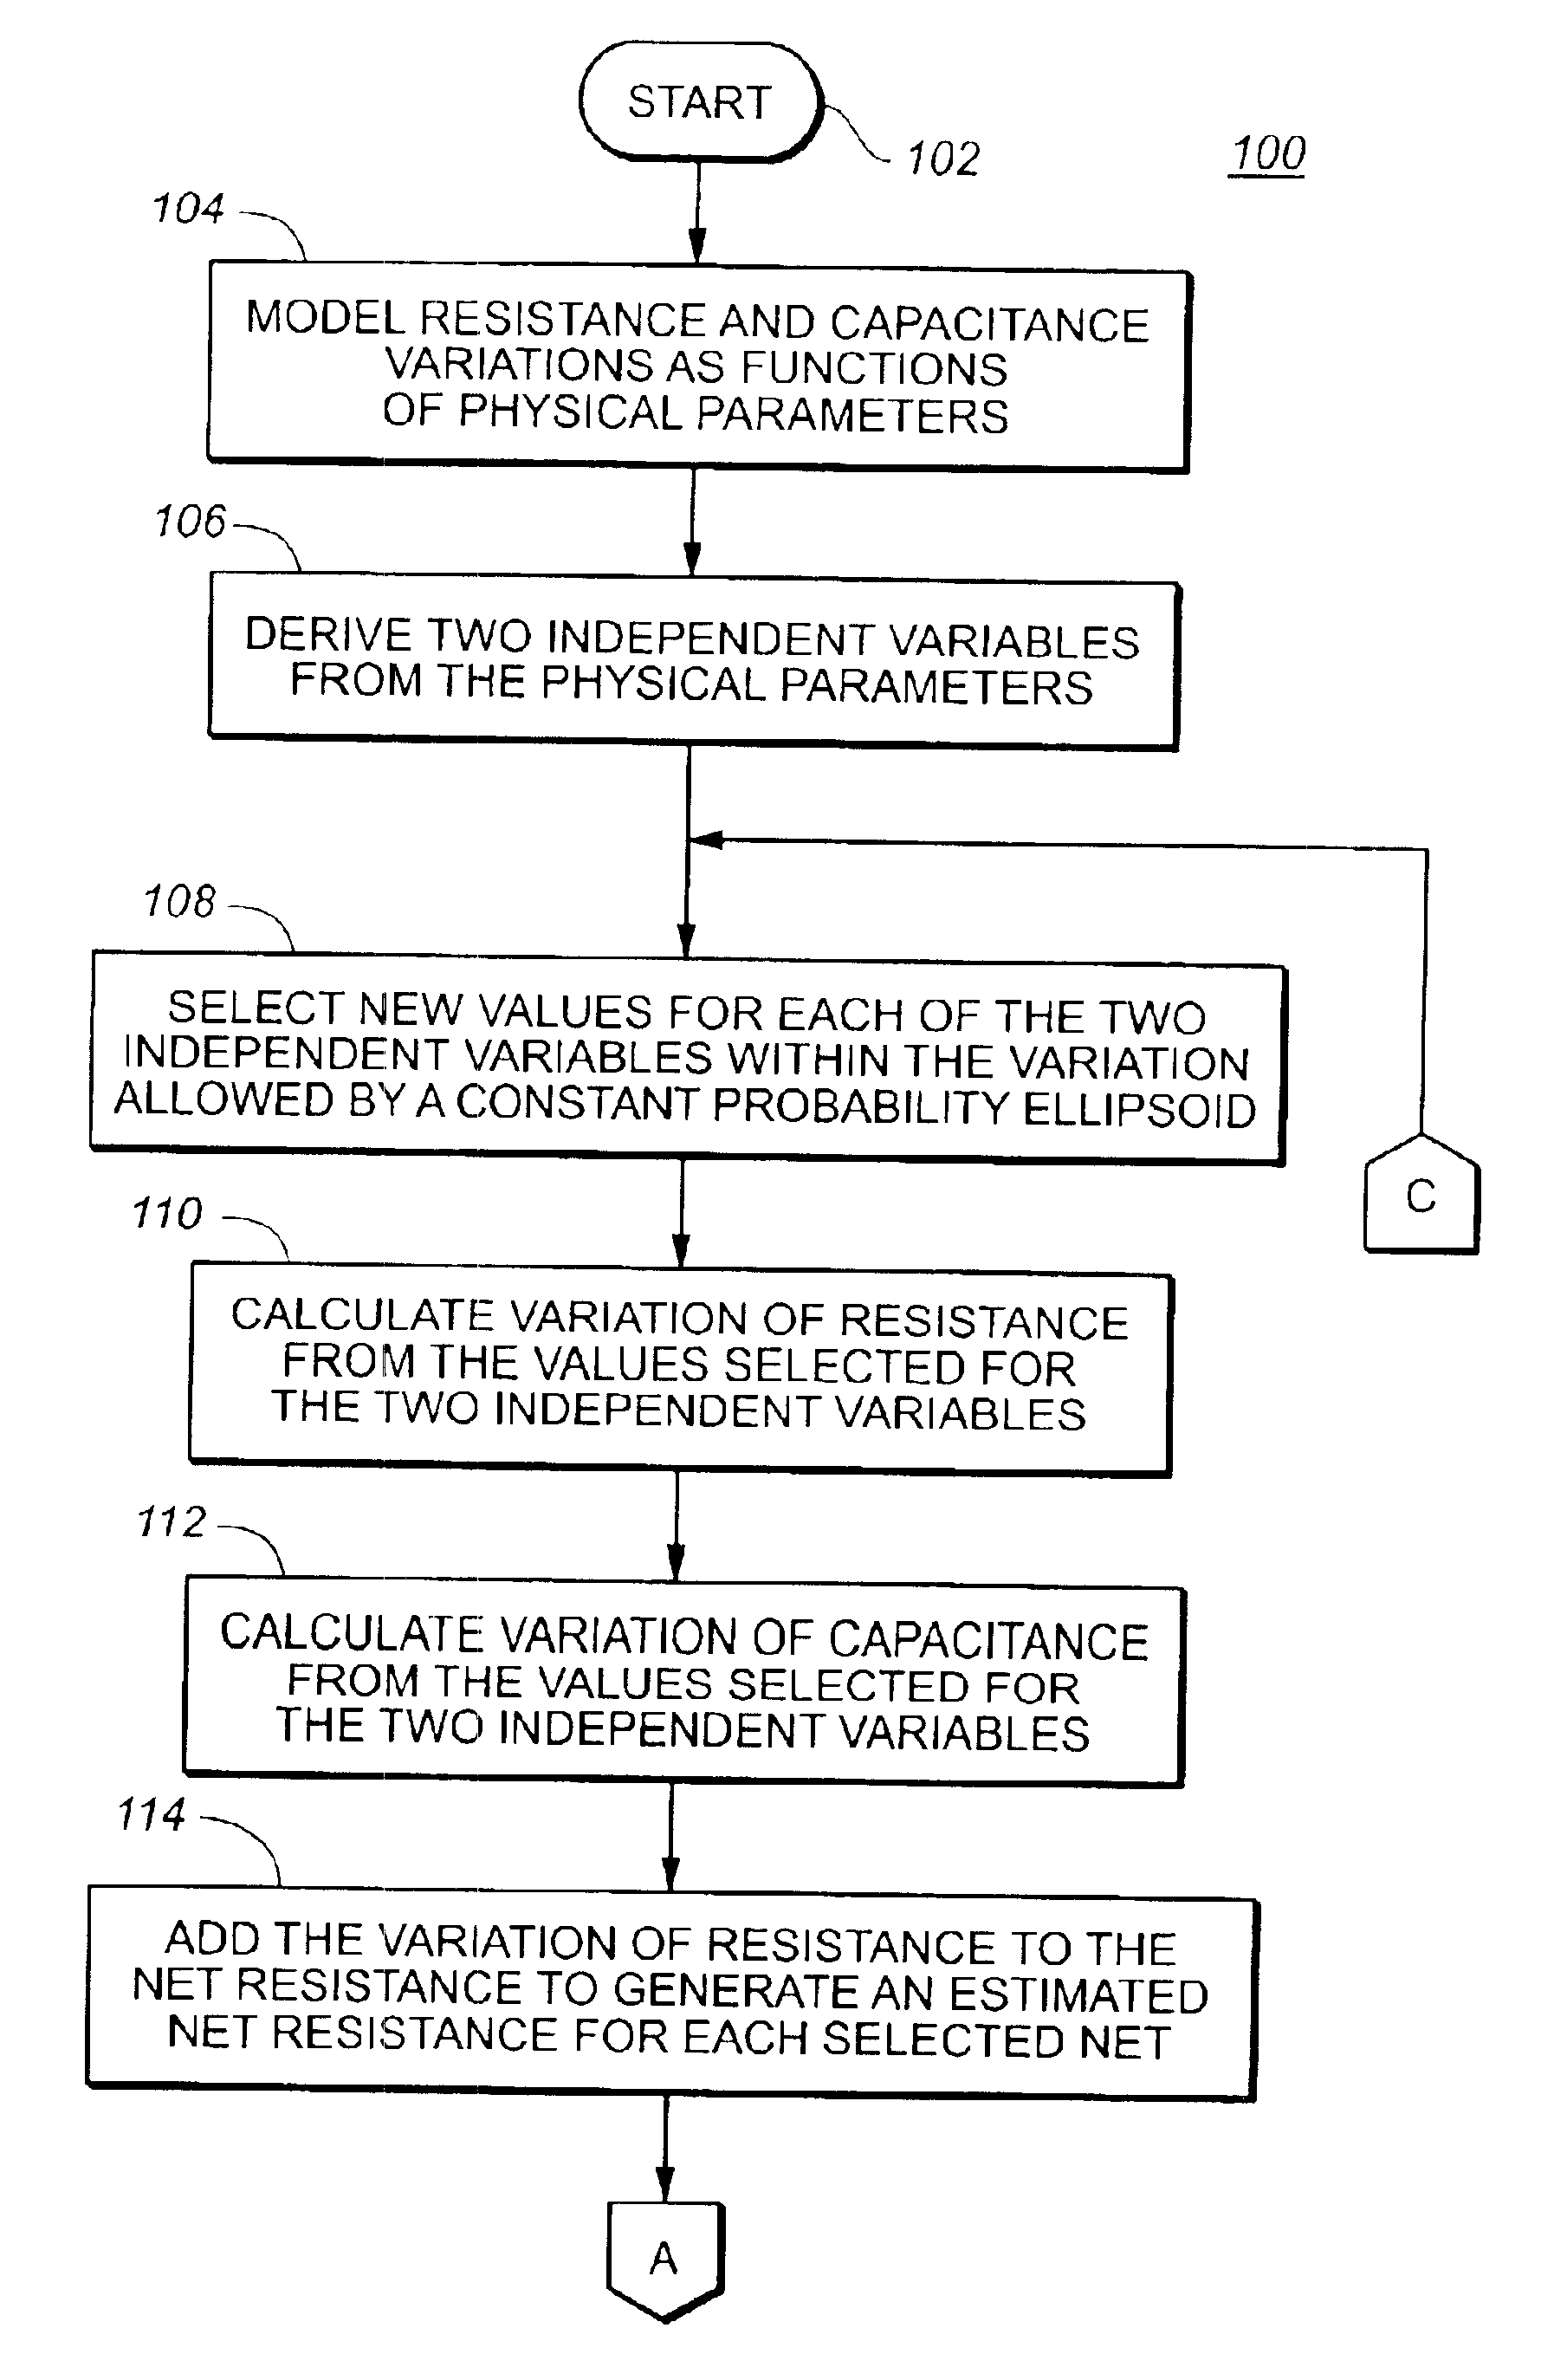 Method of delay calculation for variation in interconnect metal process